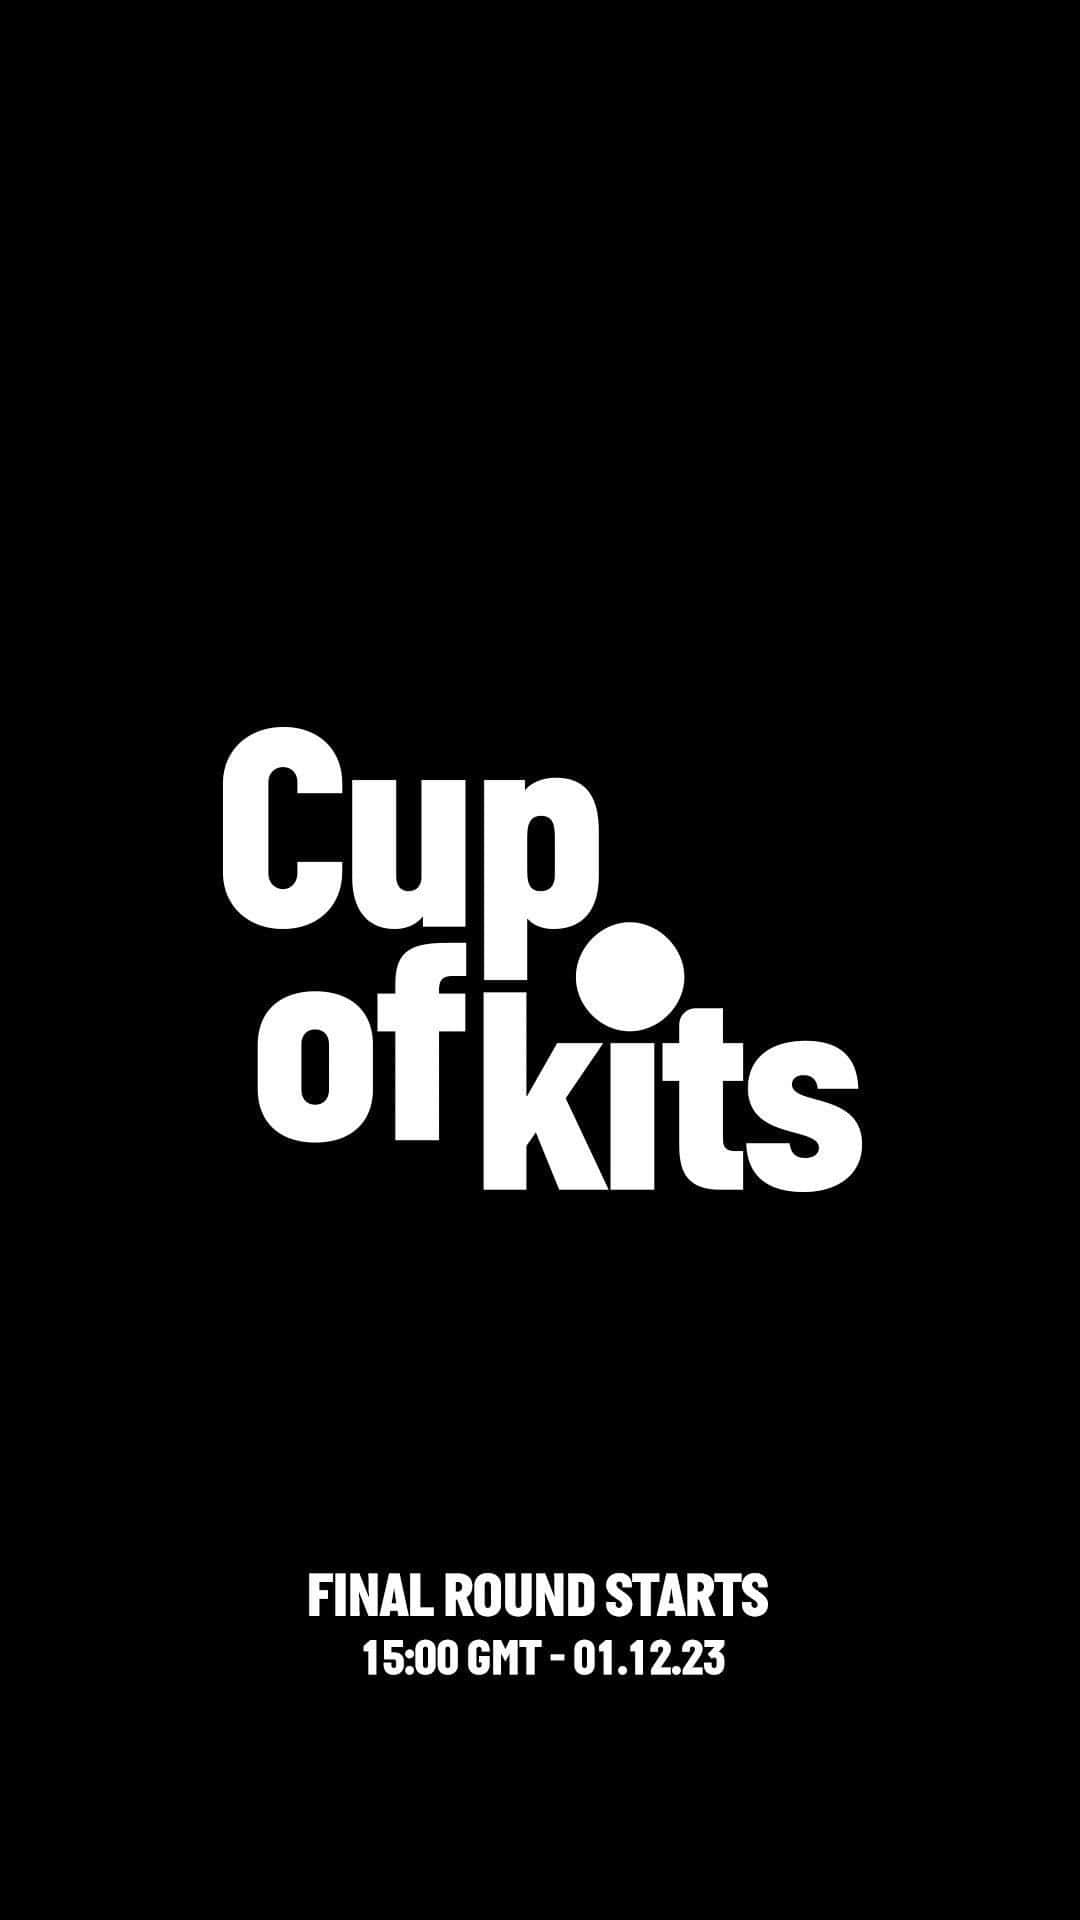 UMBROのインスタグラム：「🏆Cup of kits 🏆.  32 teams entered. 8 remain. Only 1 can win 🥇.  8 kits from 💎 💎clubs and national teams are heading into the final stages and we want you to decide our 2023 #cupofkits champion.  Voting kicks off on the @umbro Twitter tomorrow at 3PM UK Time.  #umbro」